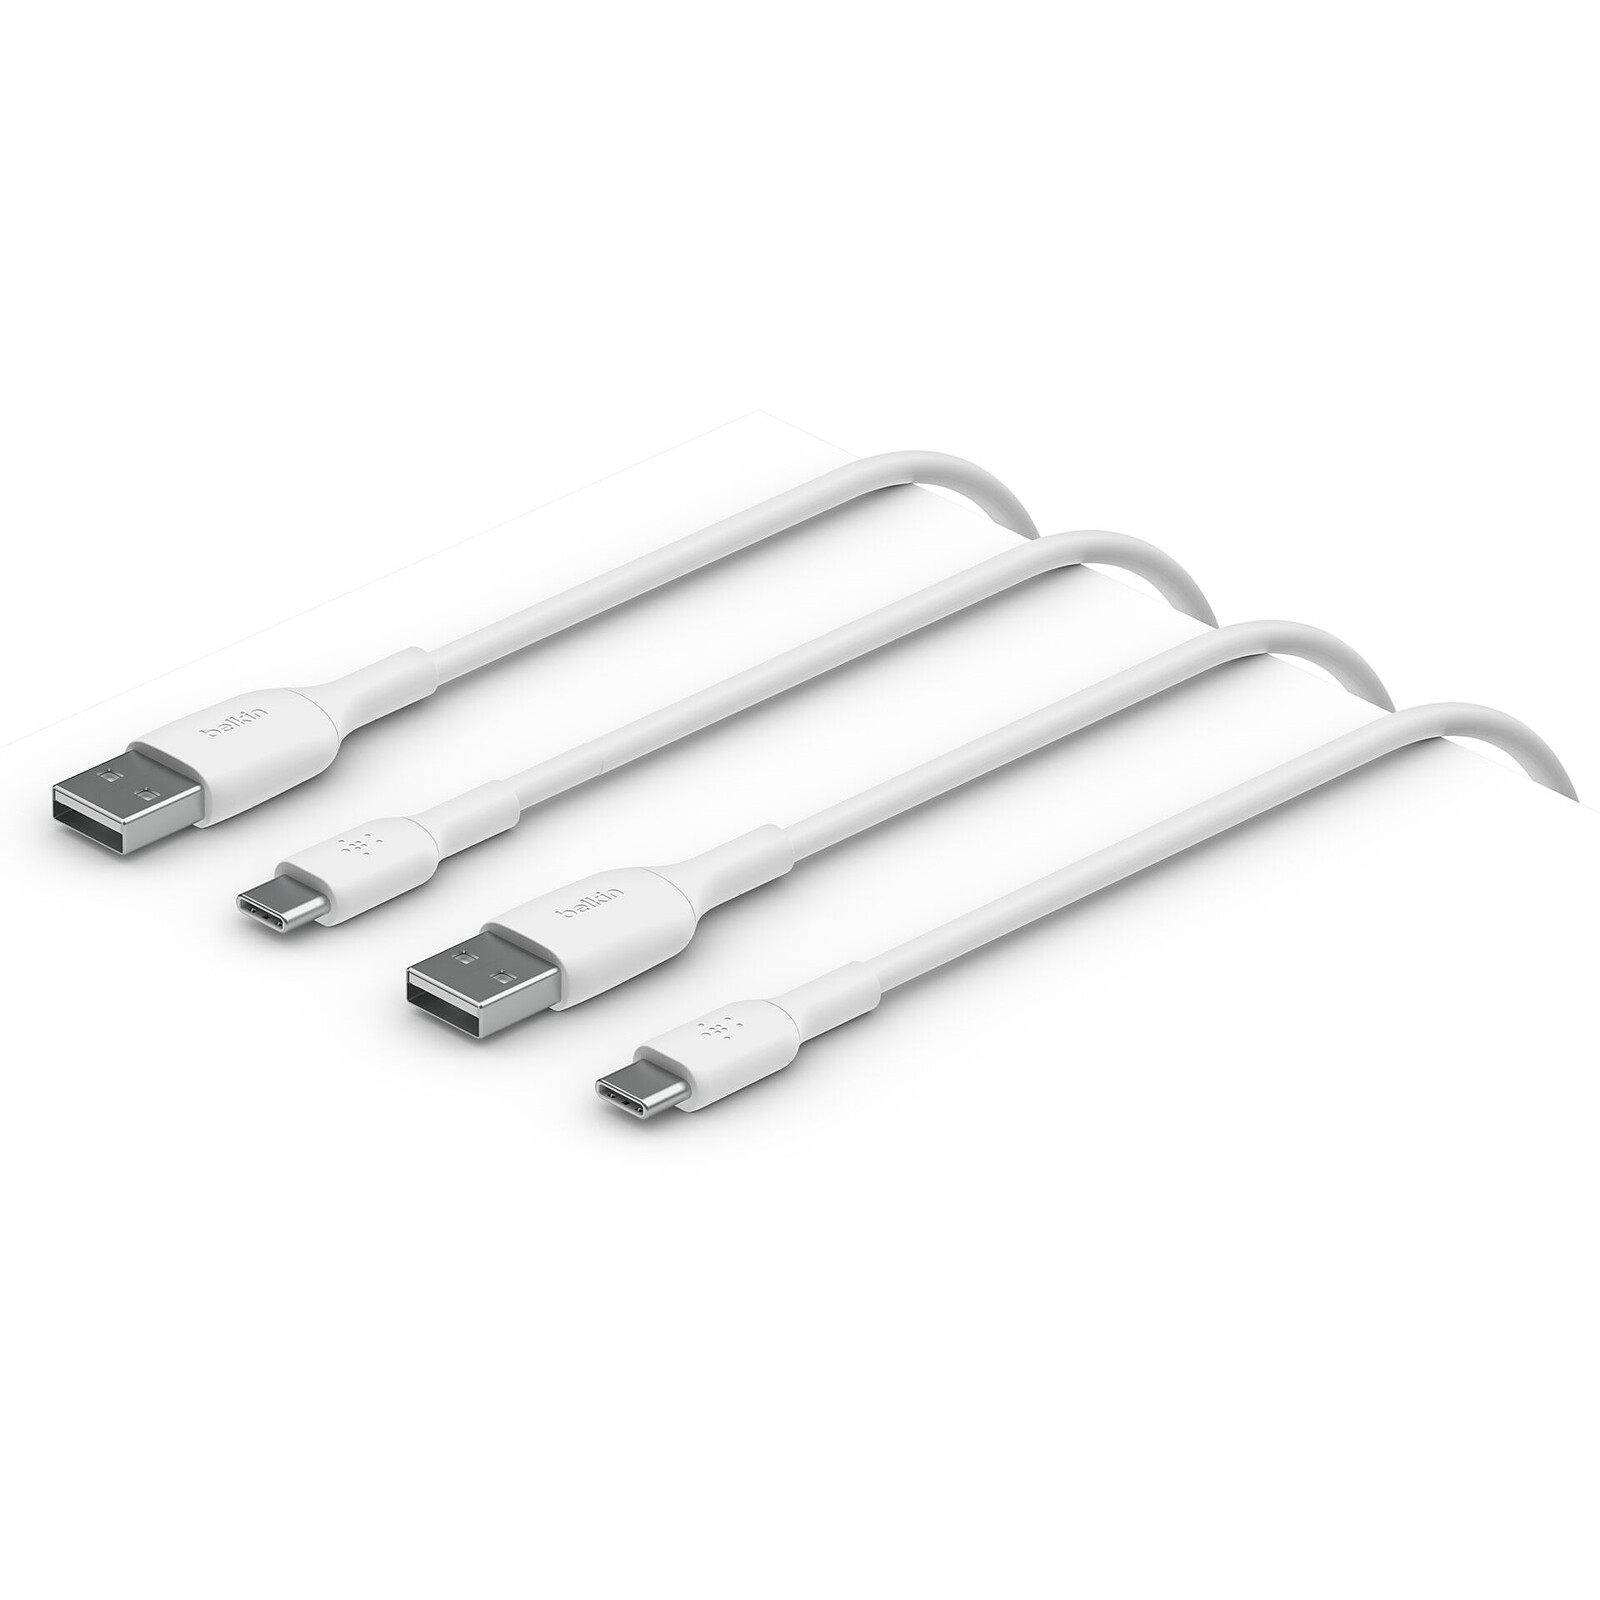 Belkin Official Support - Which Belkin USB Type-C Cable is best for your  device?